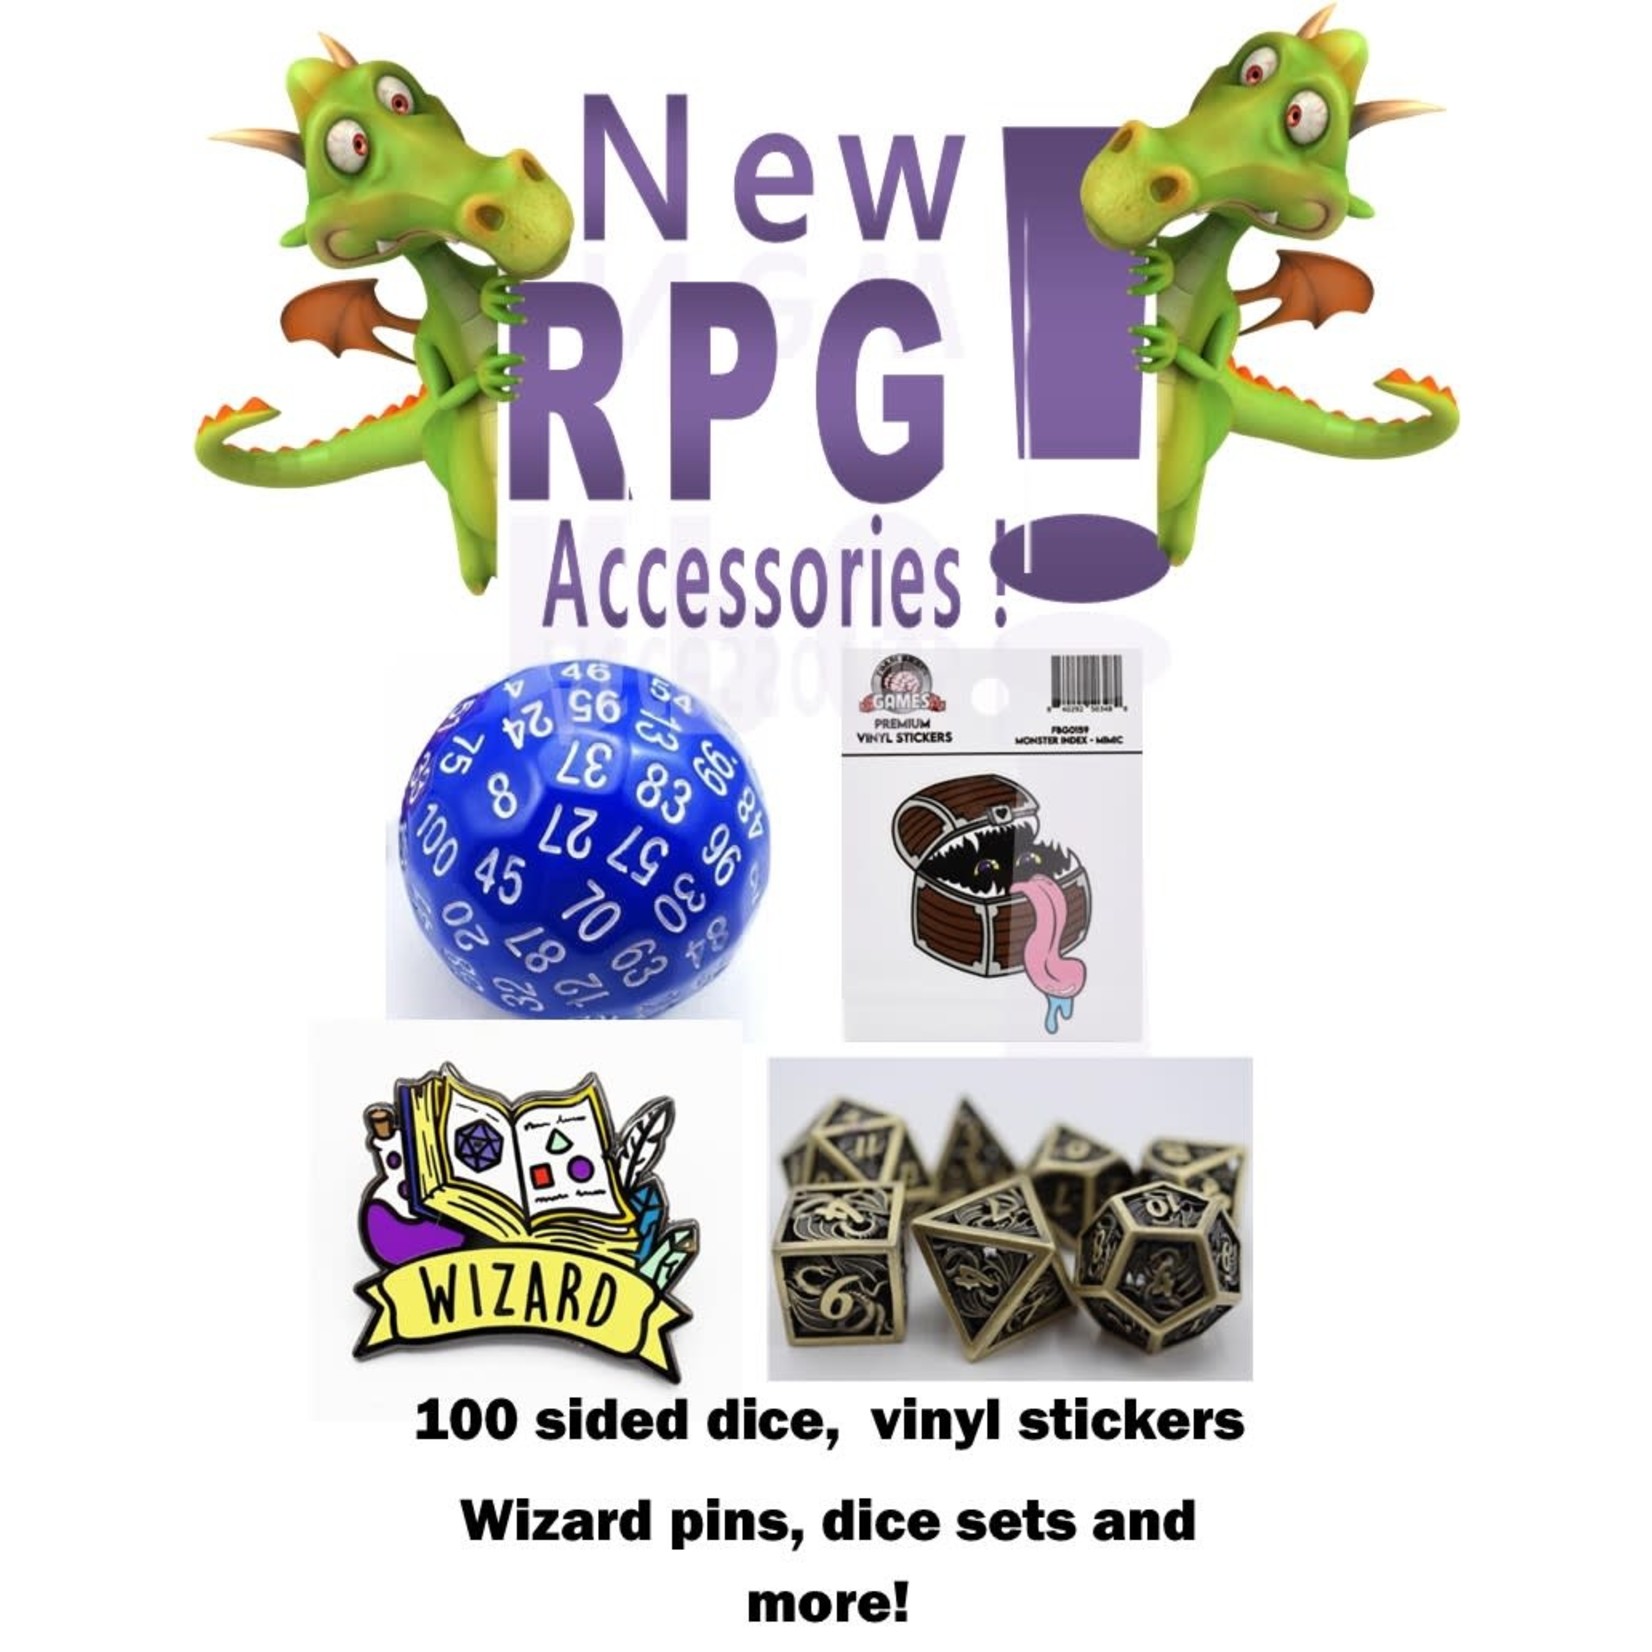 New RPG Accessories!